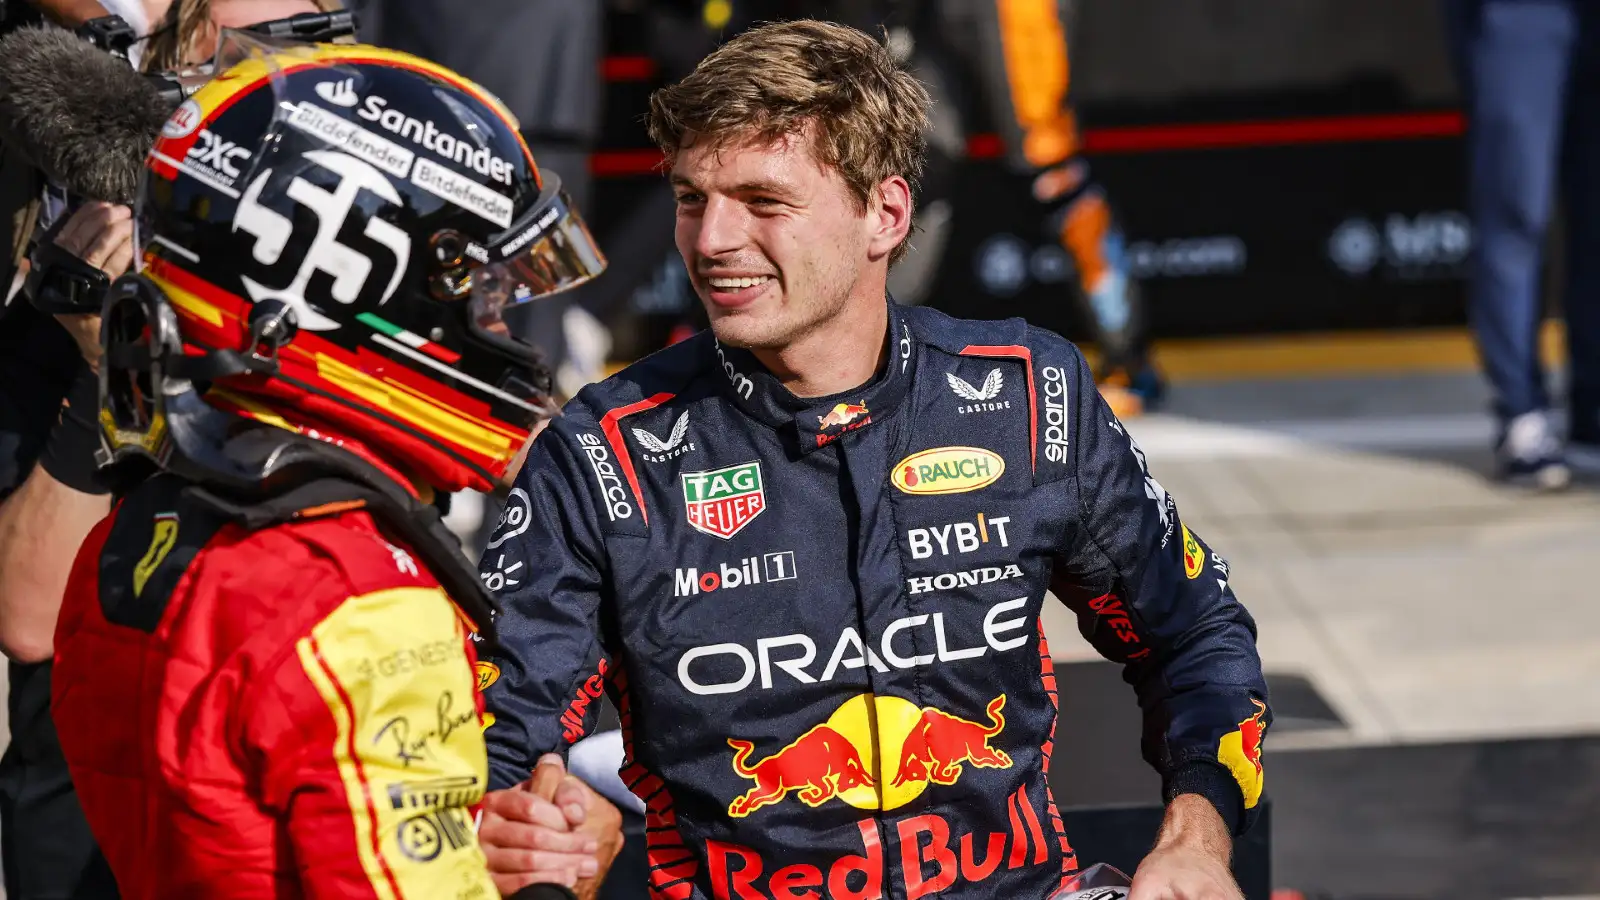 Monza: Max Verstappen and Carlos Sainz celebrate their positions at the Italian Grand Prix.